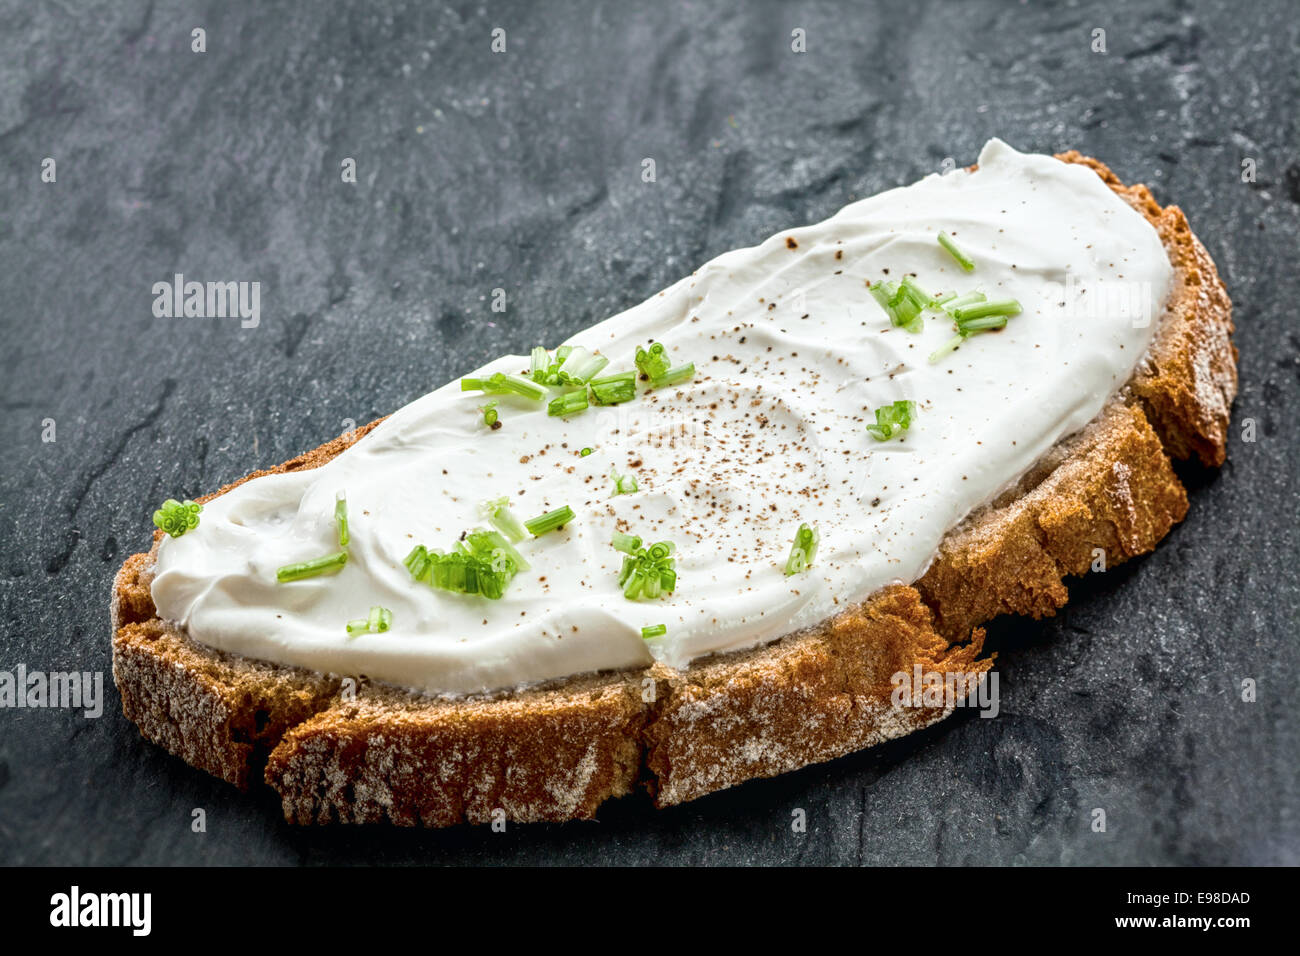 Healthy low fat cream cheese and chopped chives on a slice of freshly baked rye bread, close up low angle view Stock Photo